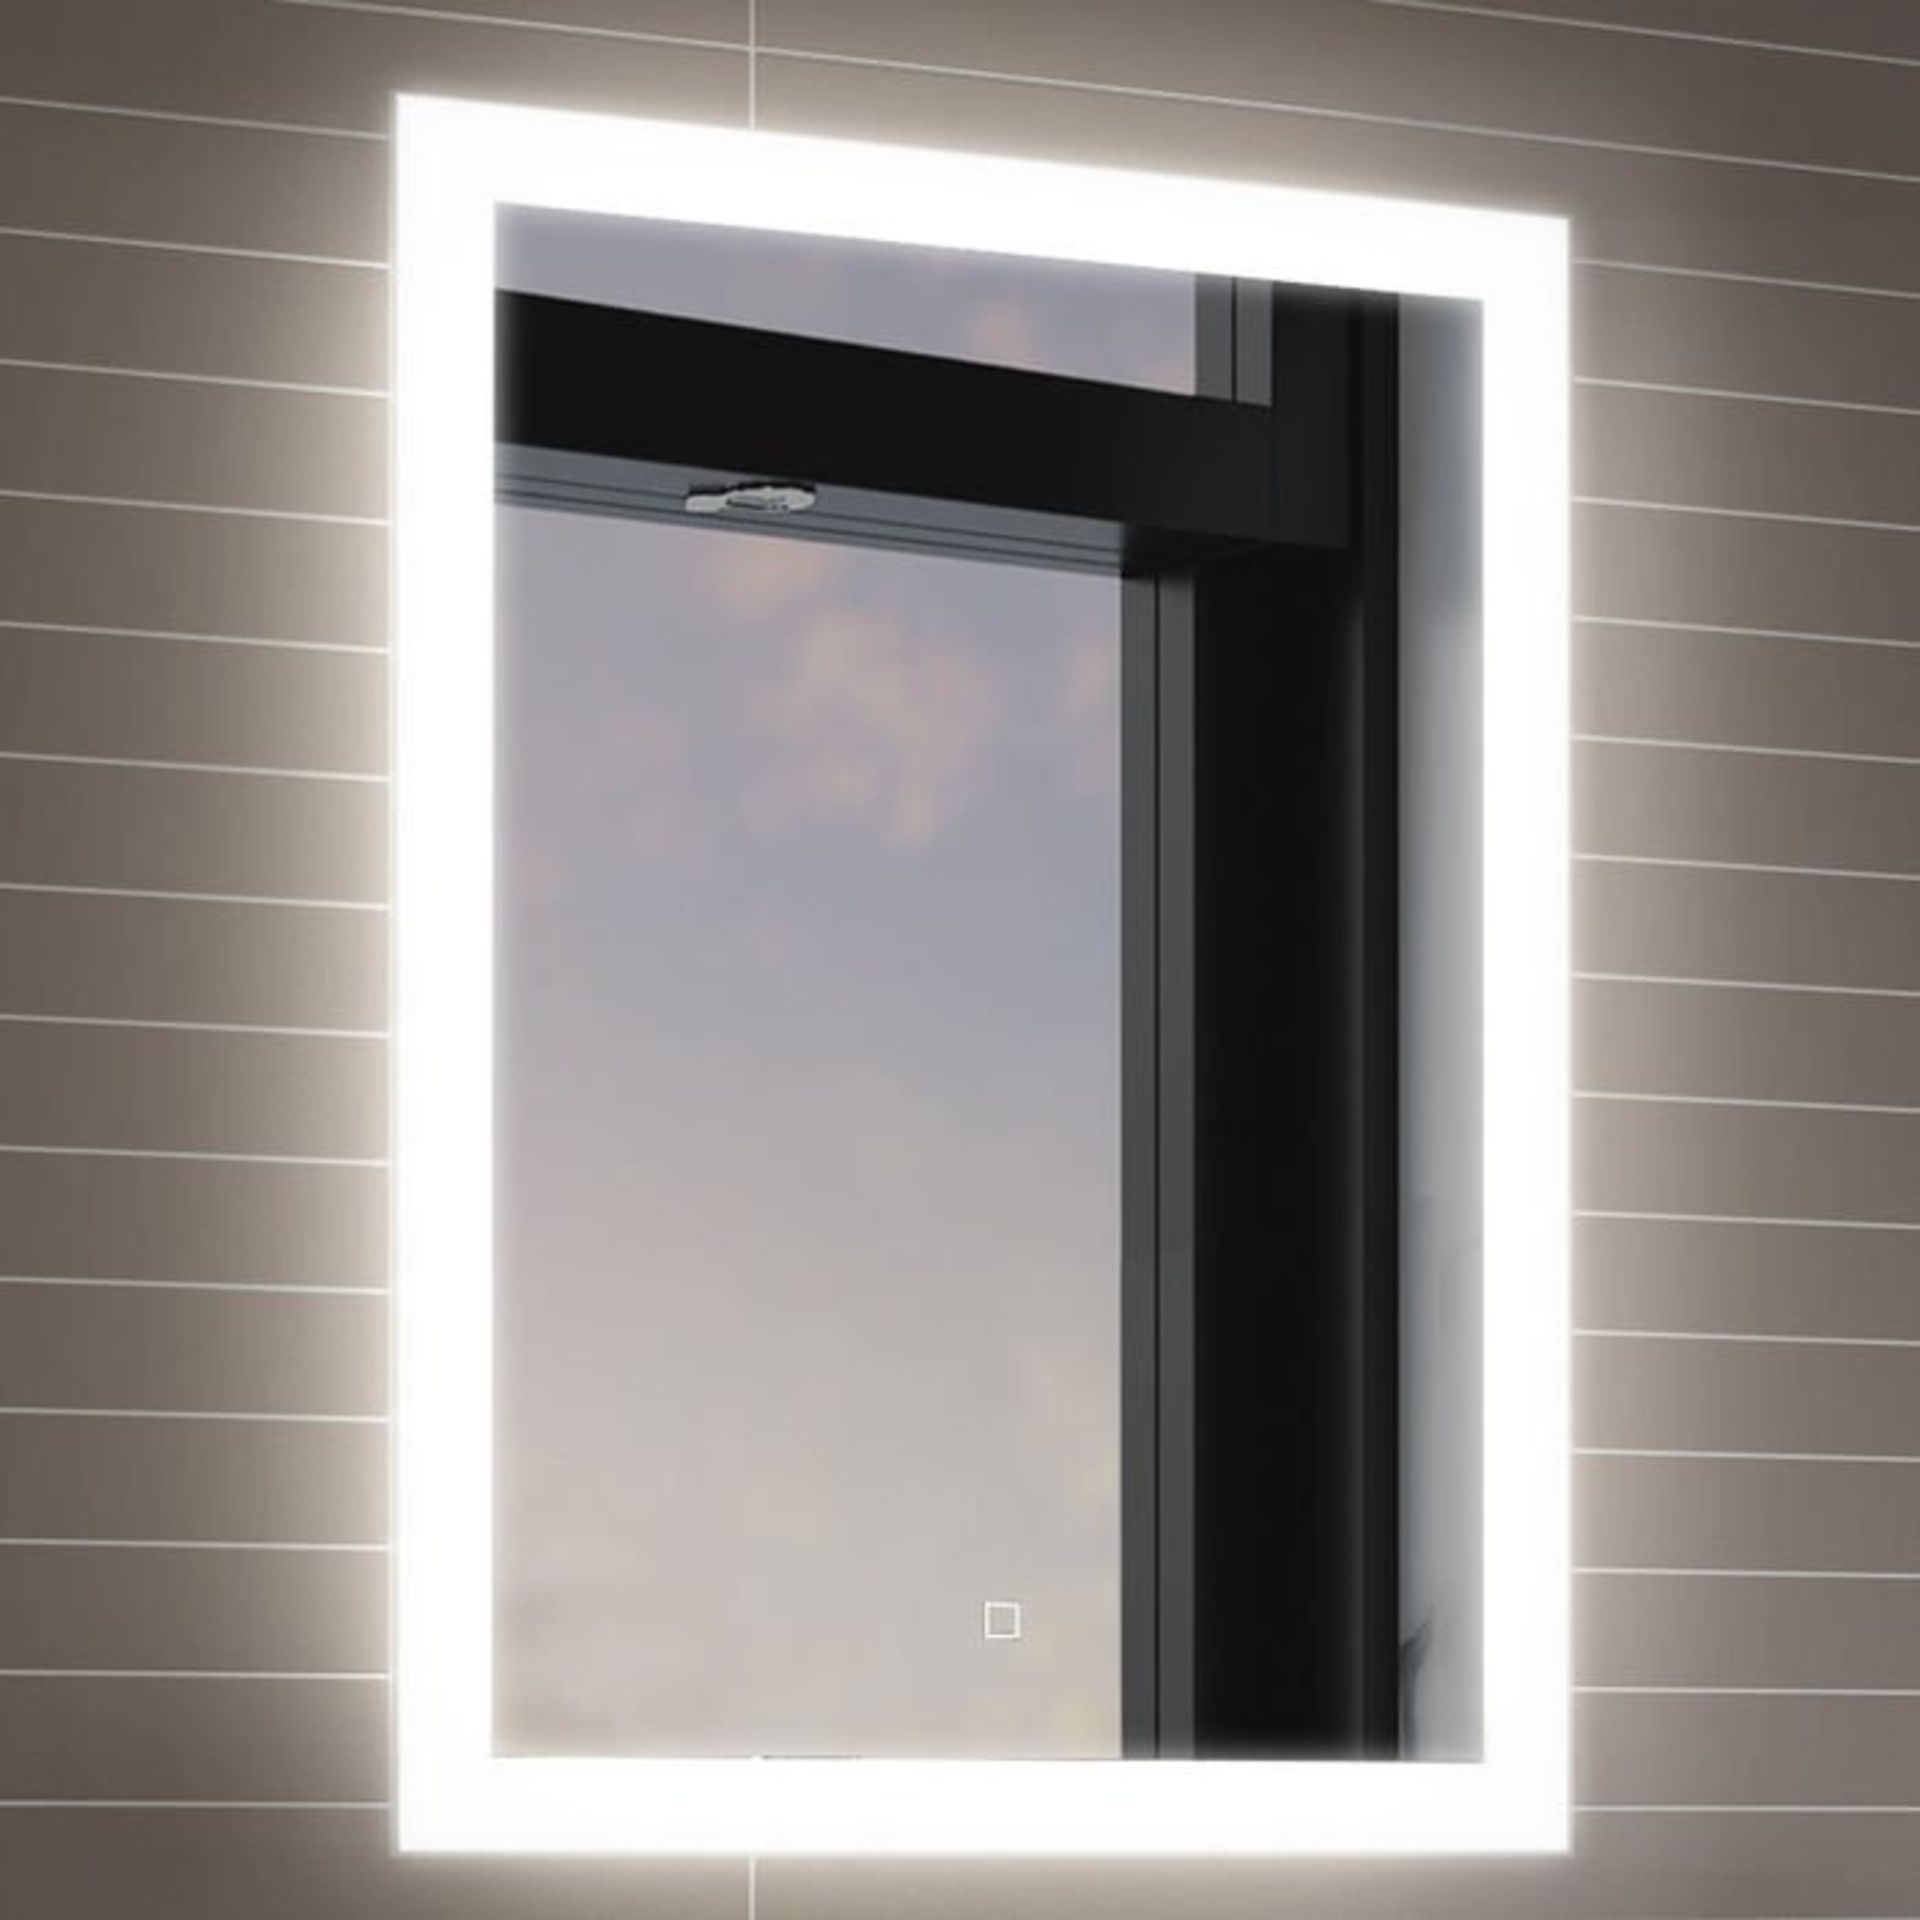 (Y203) 700x500mm Orion Illuminated LED Mirror - Switch Control. RRP £349.99. Energy efficient LED - Image 2 of 6